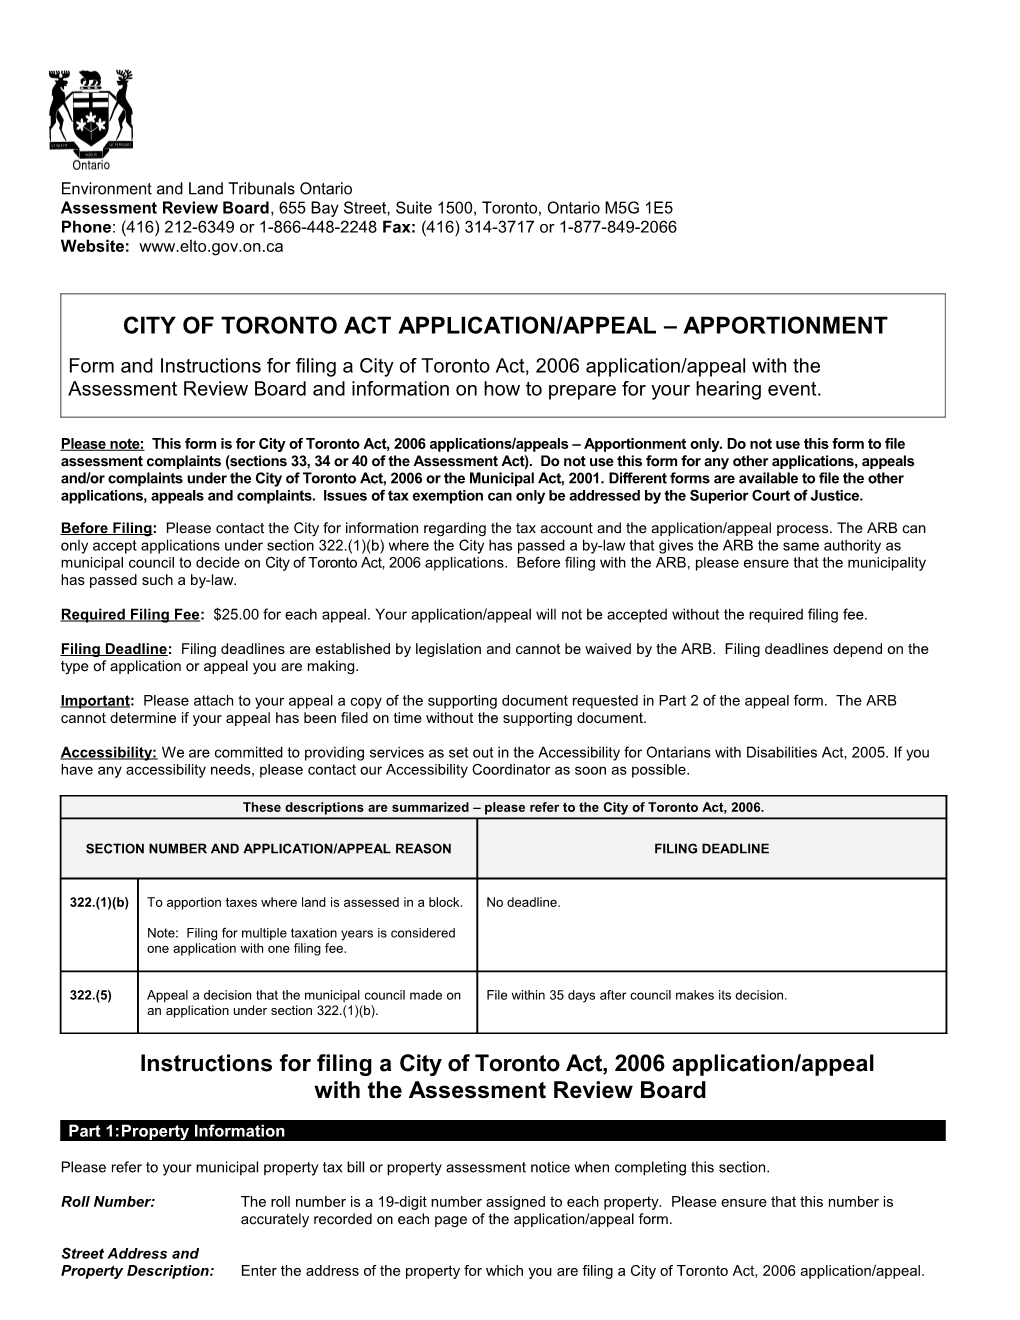 City of Toronto Act Application/Appeal Apportionment